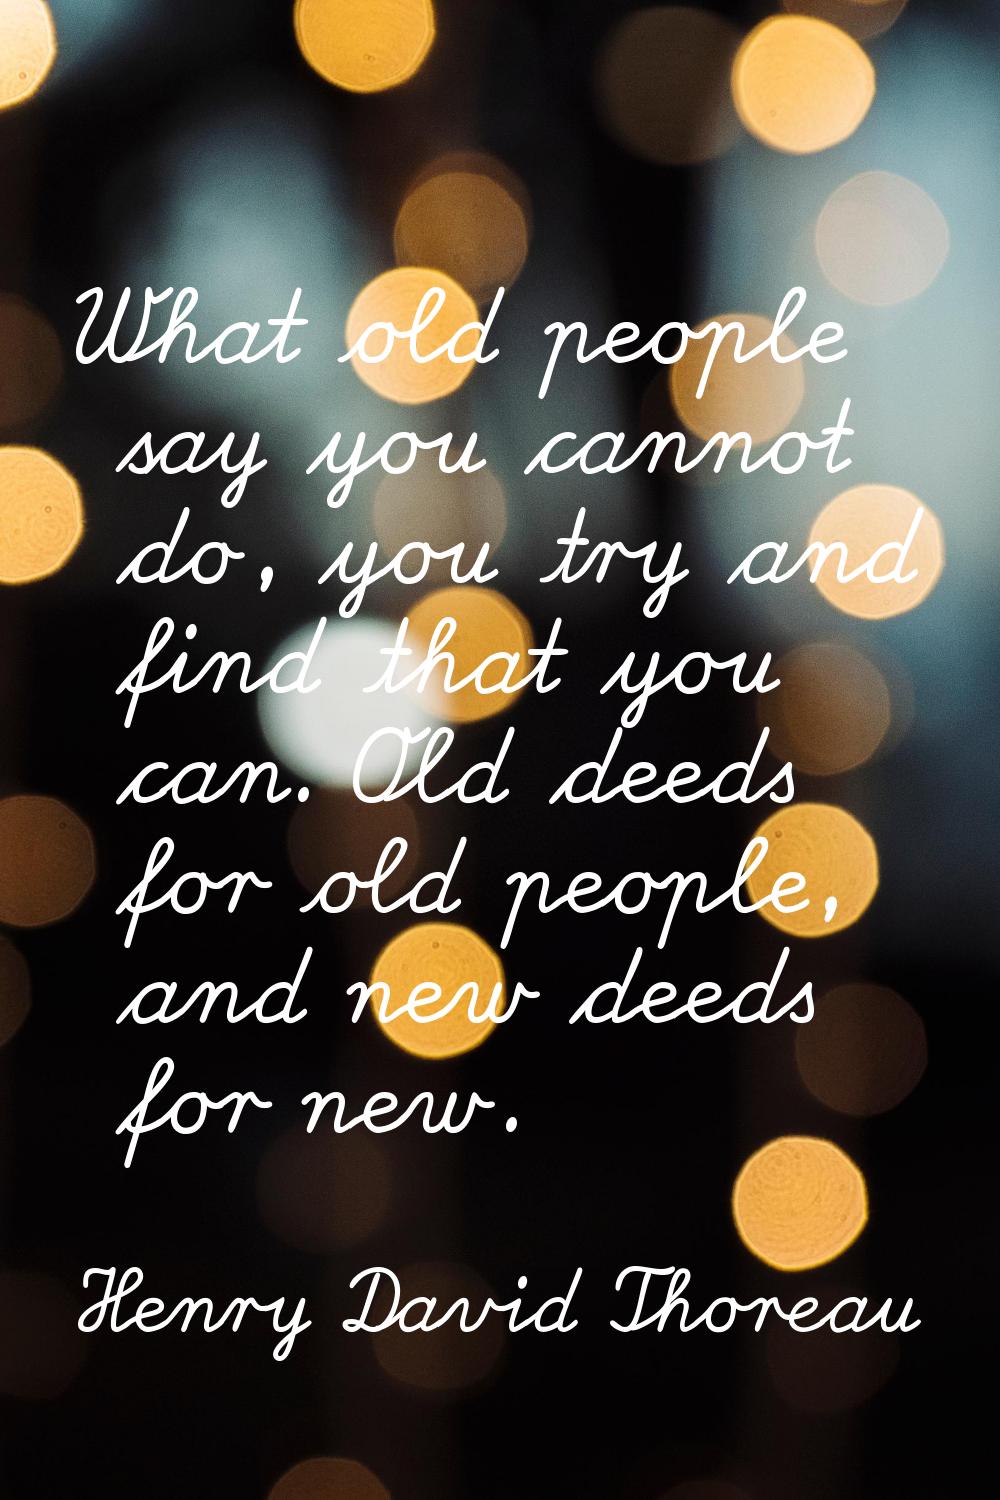 What old people say you cannot do, you try and find that you can. Old deeds for old people, and new